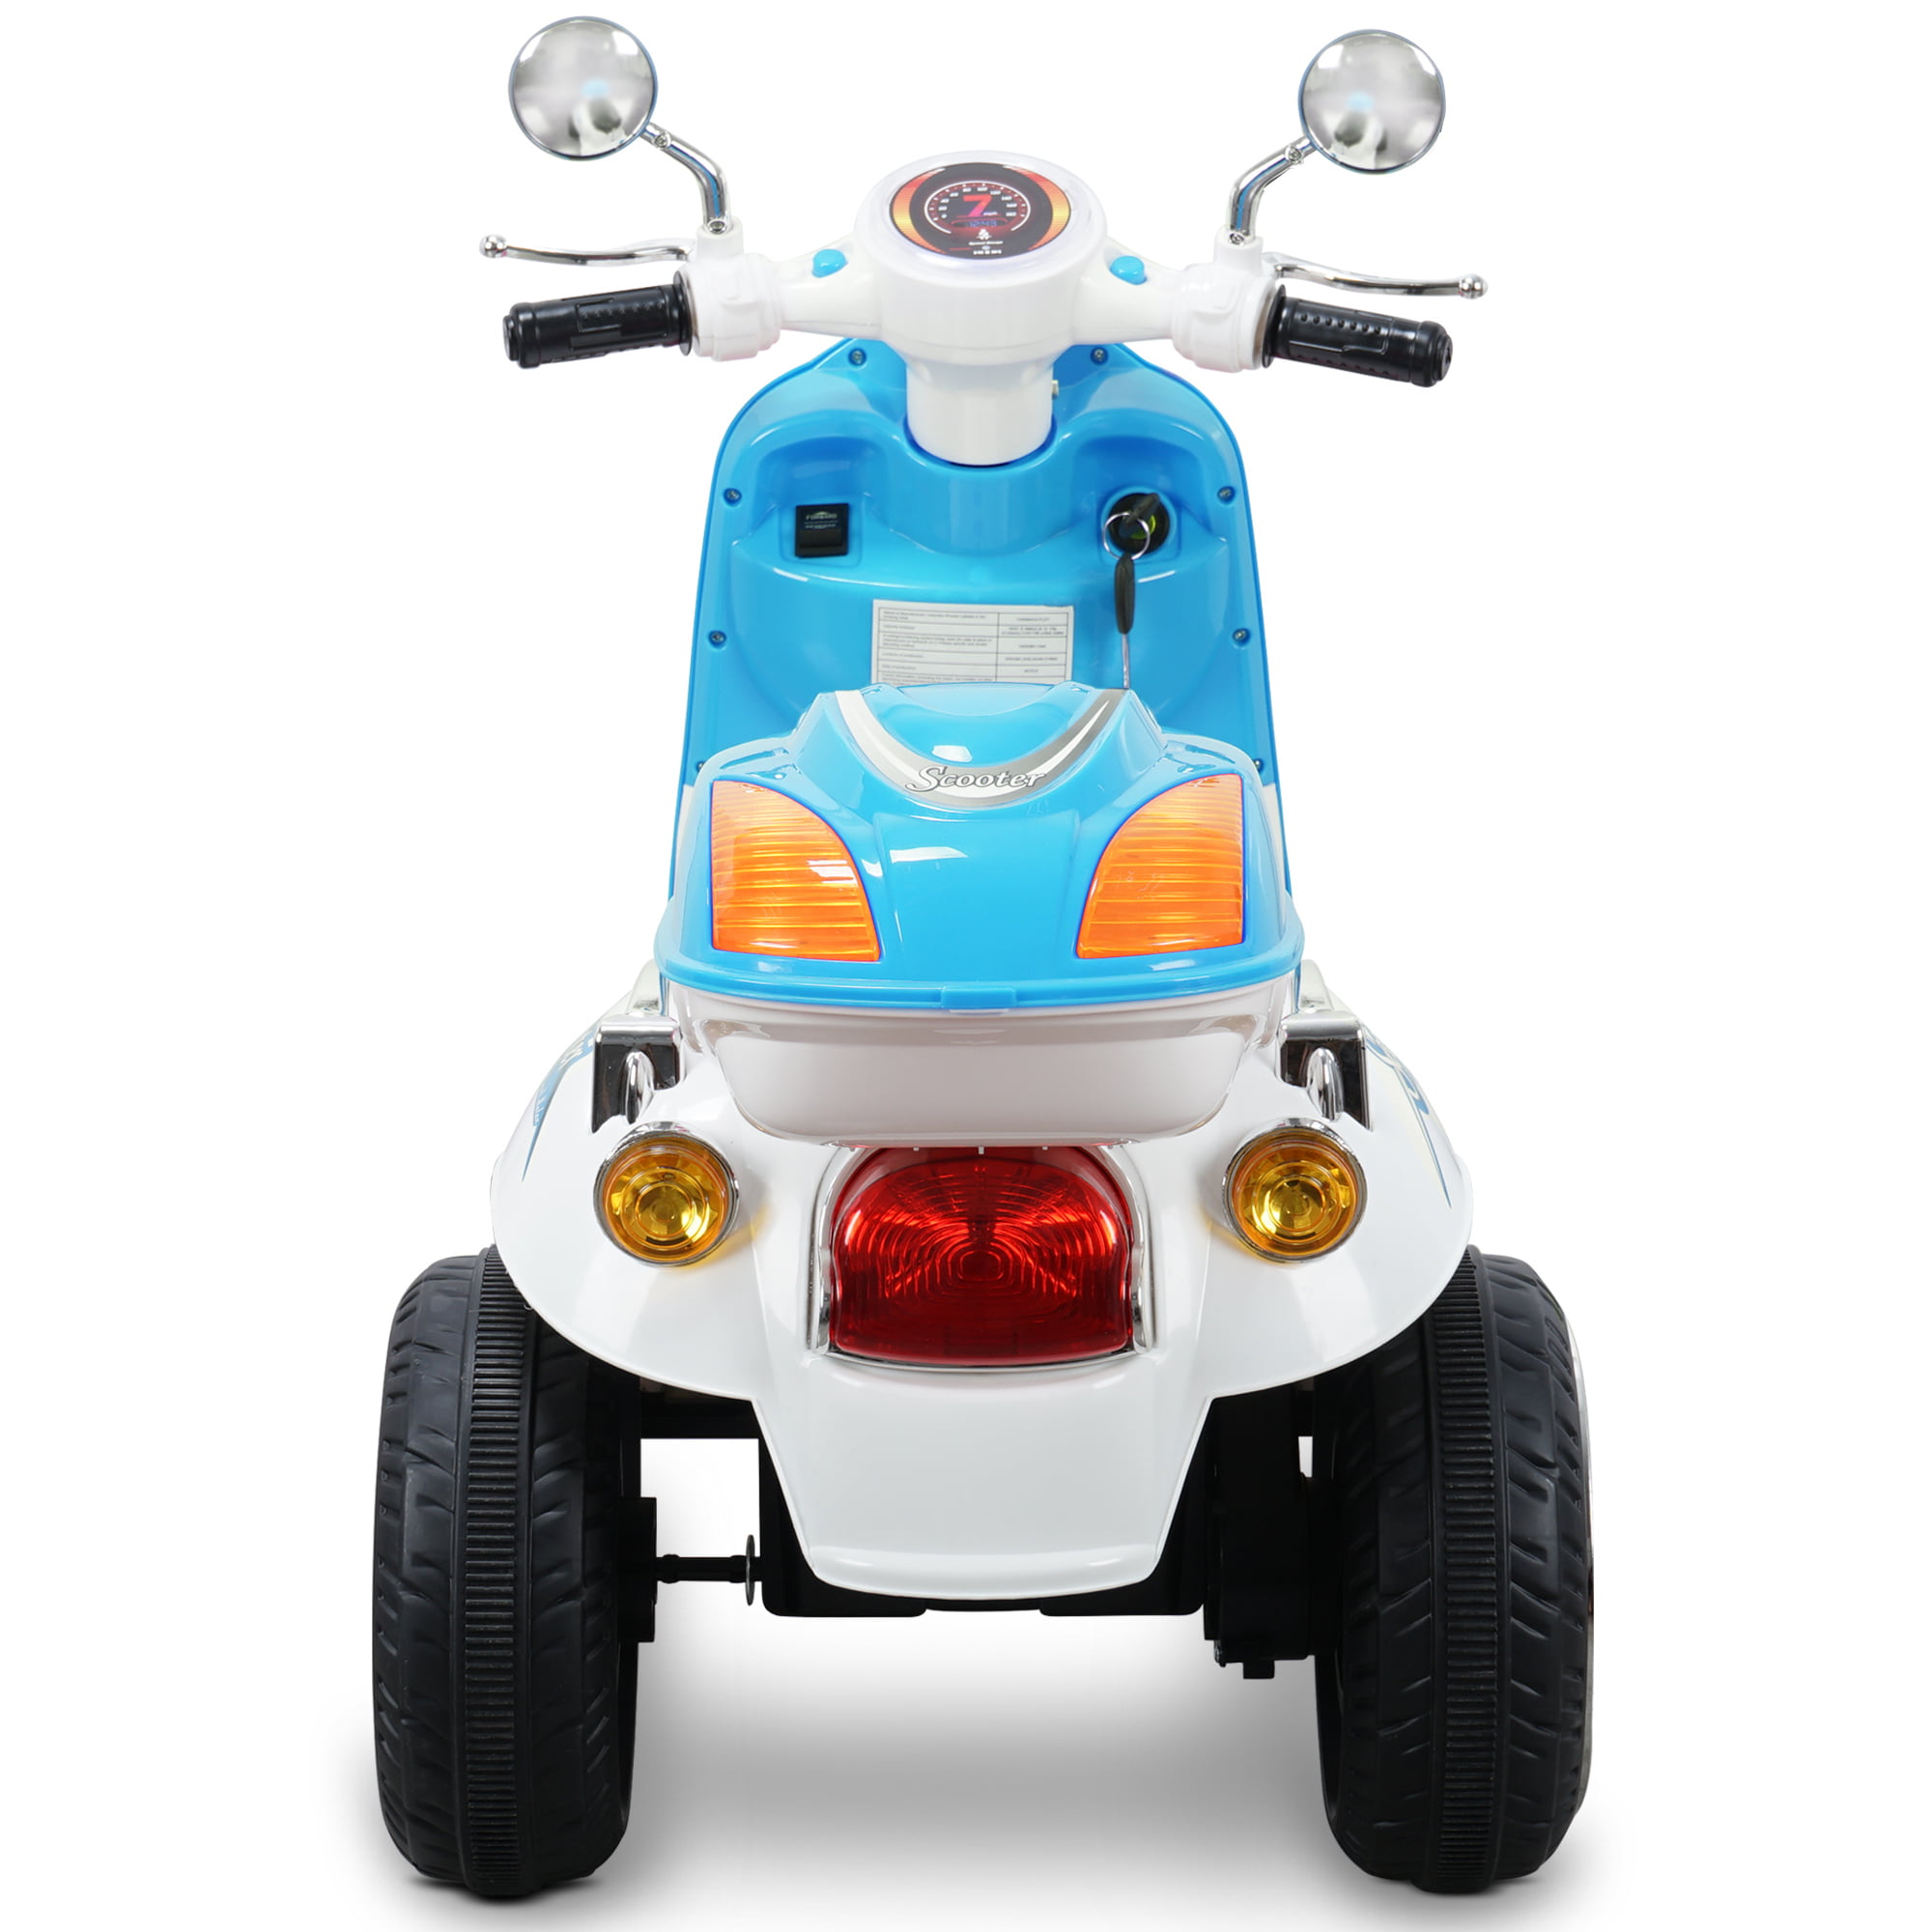 Z-Battery for kids electric car and motorcycle, kids electric car